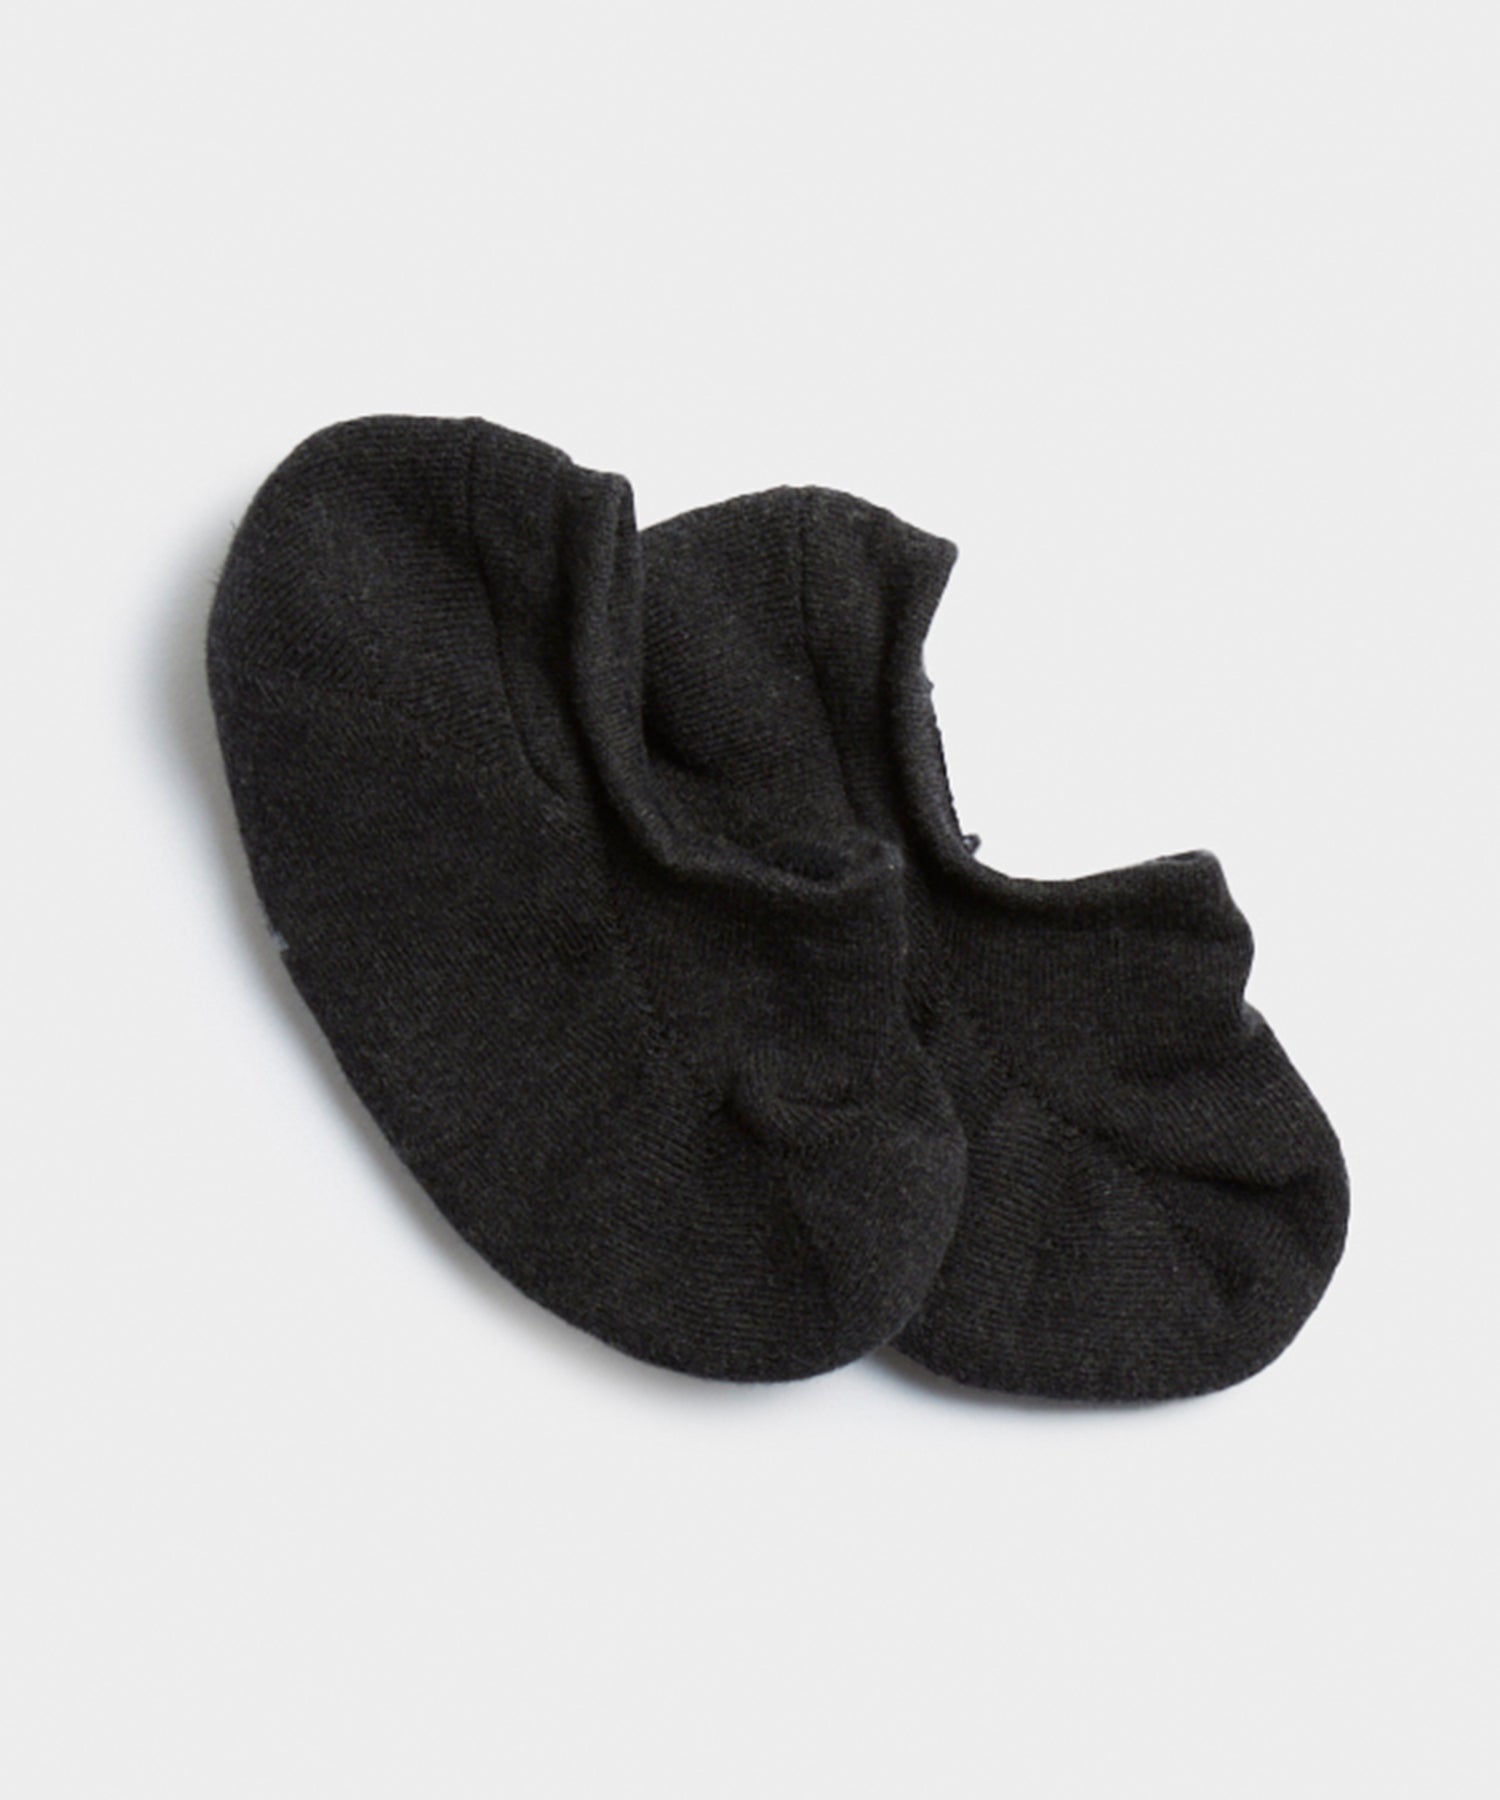 Rototo Pile Foot Cover in Black